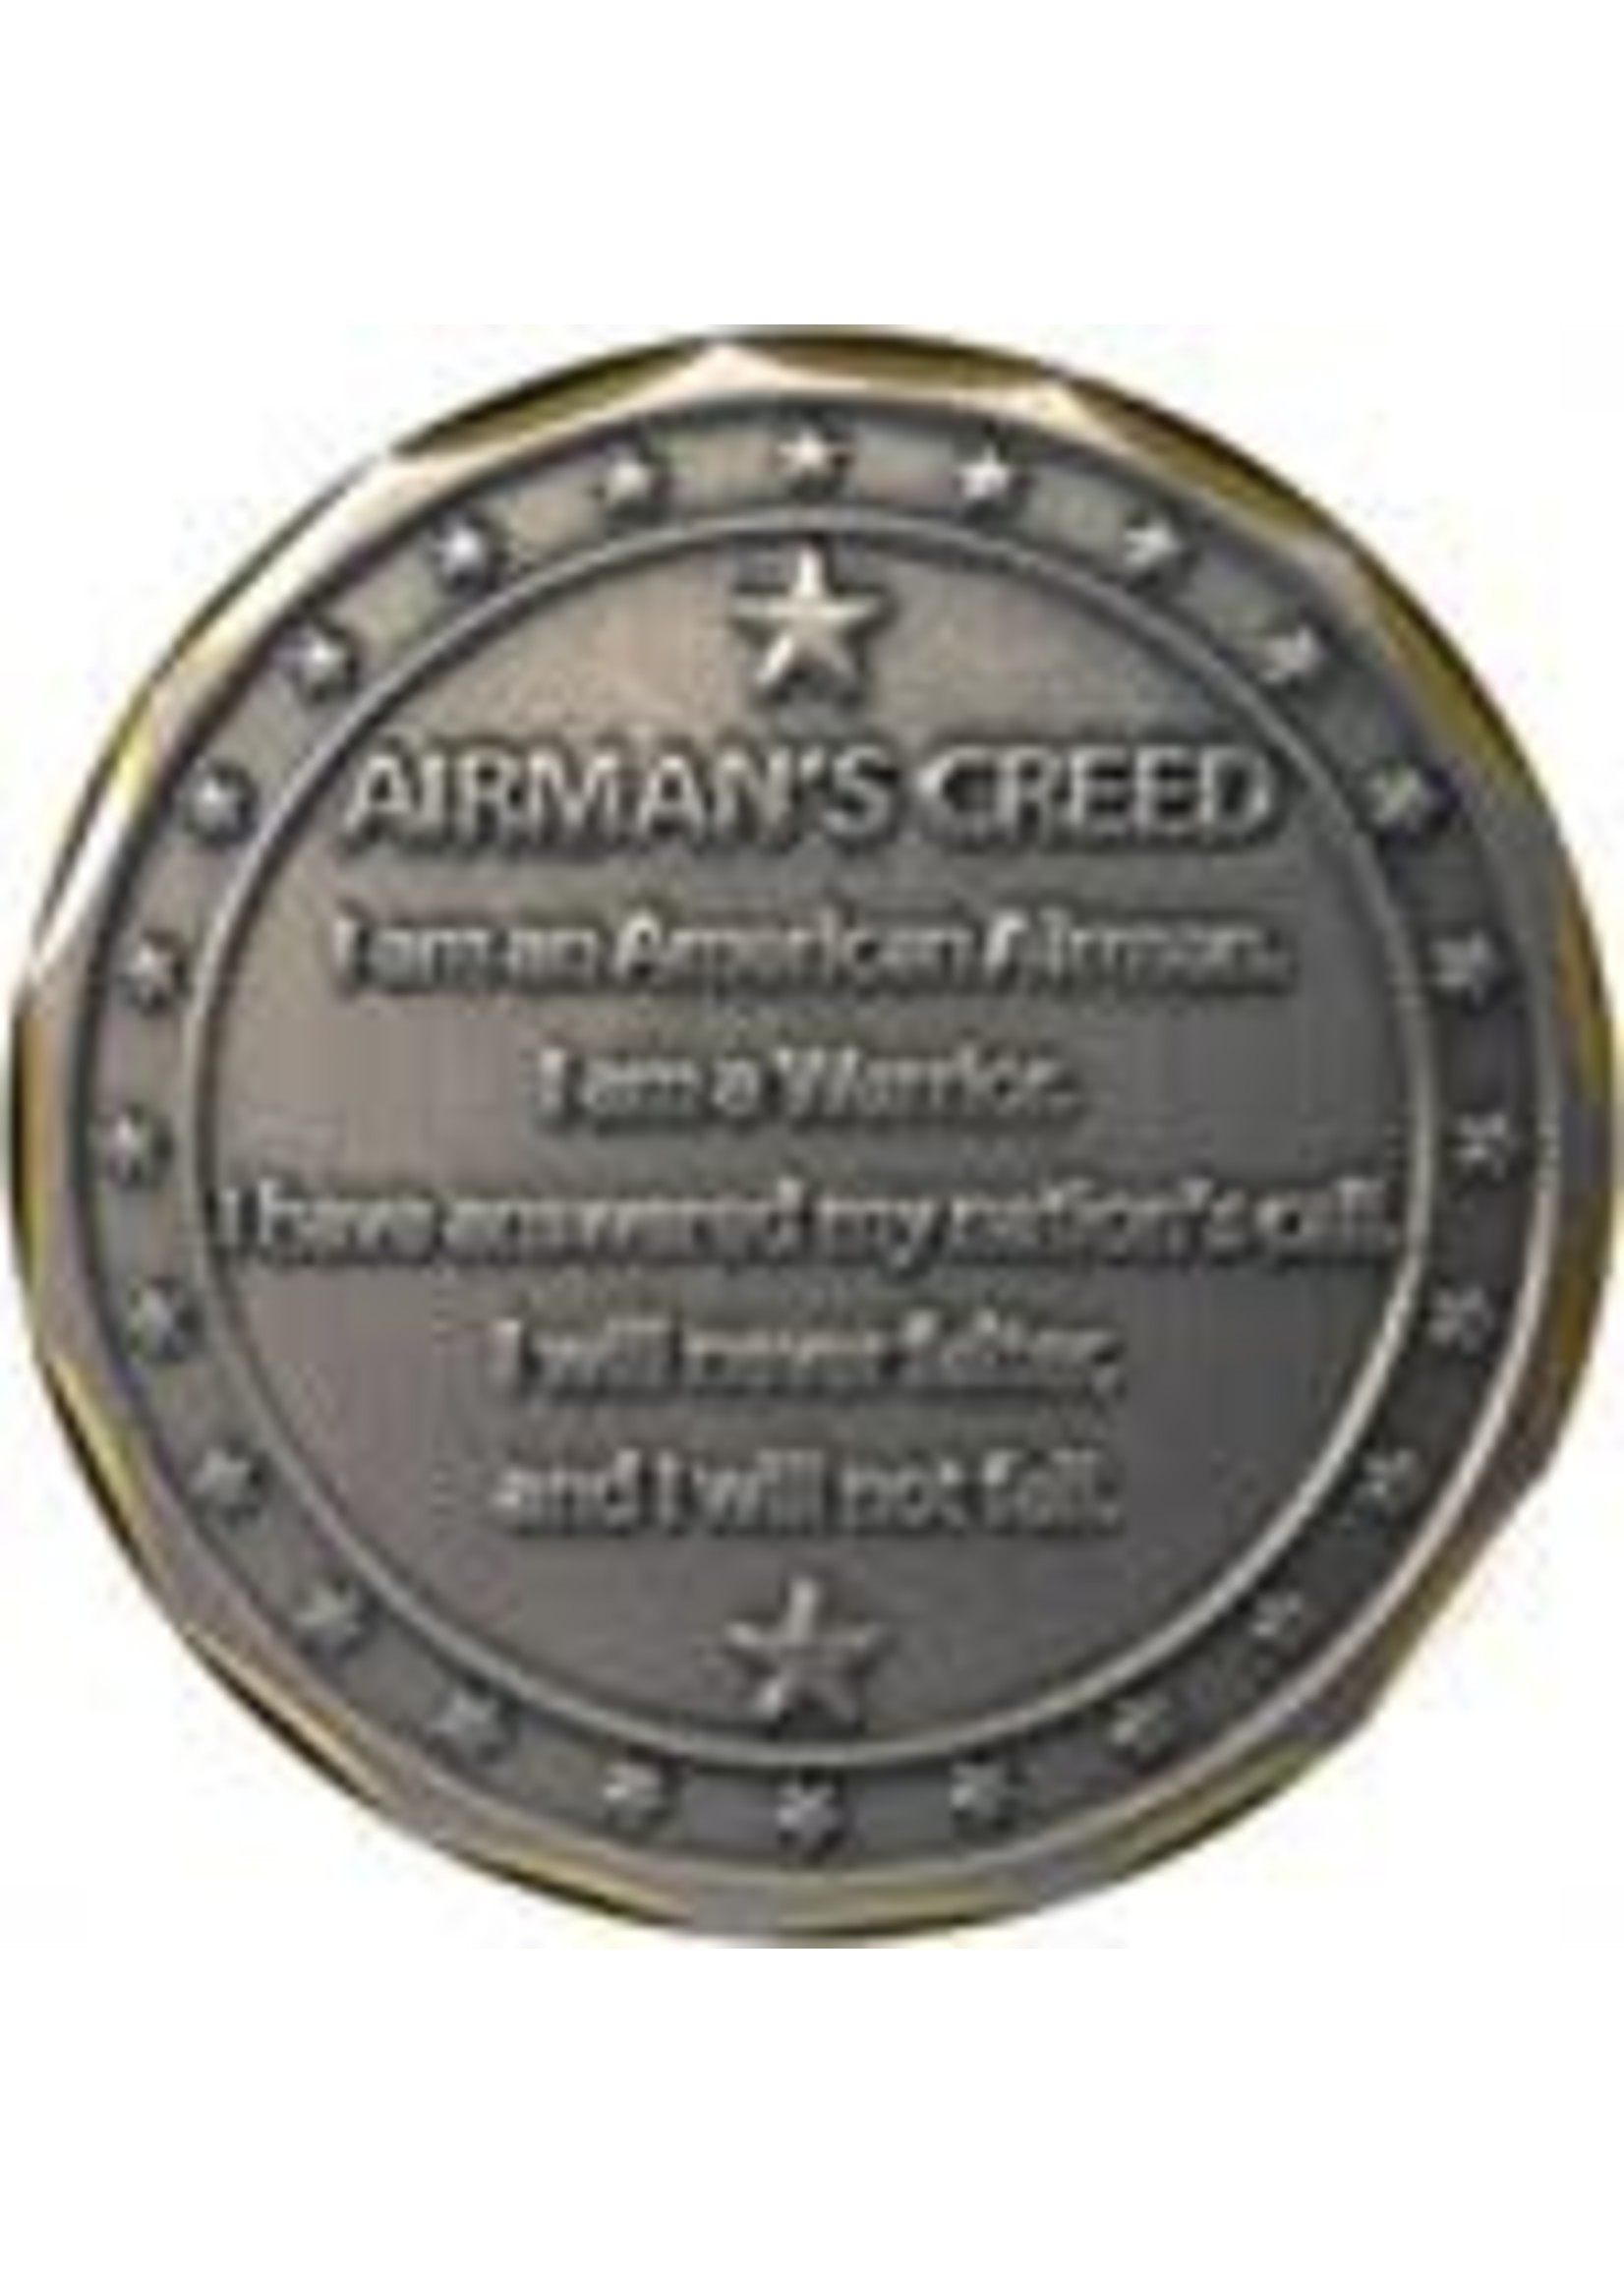 Eagle Crest Challenge Coin - Air Force Logo Airmen's Creed